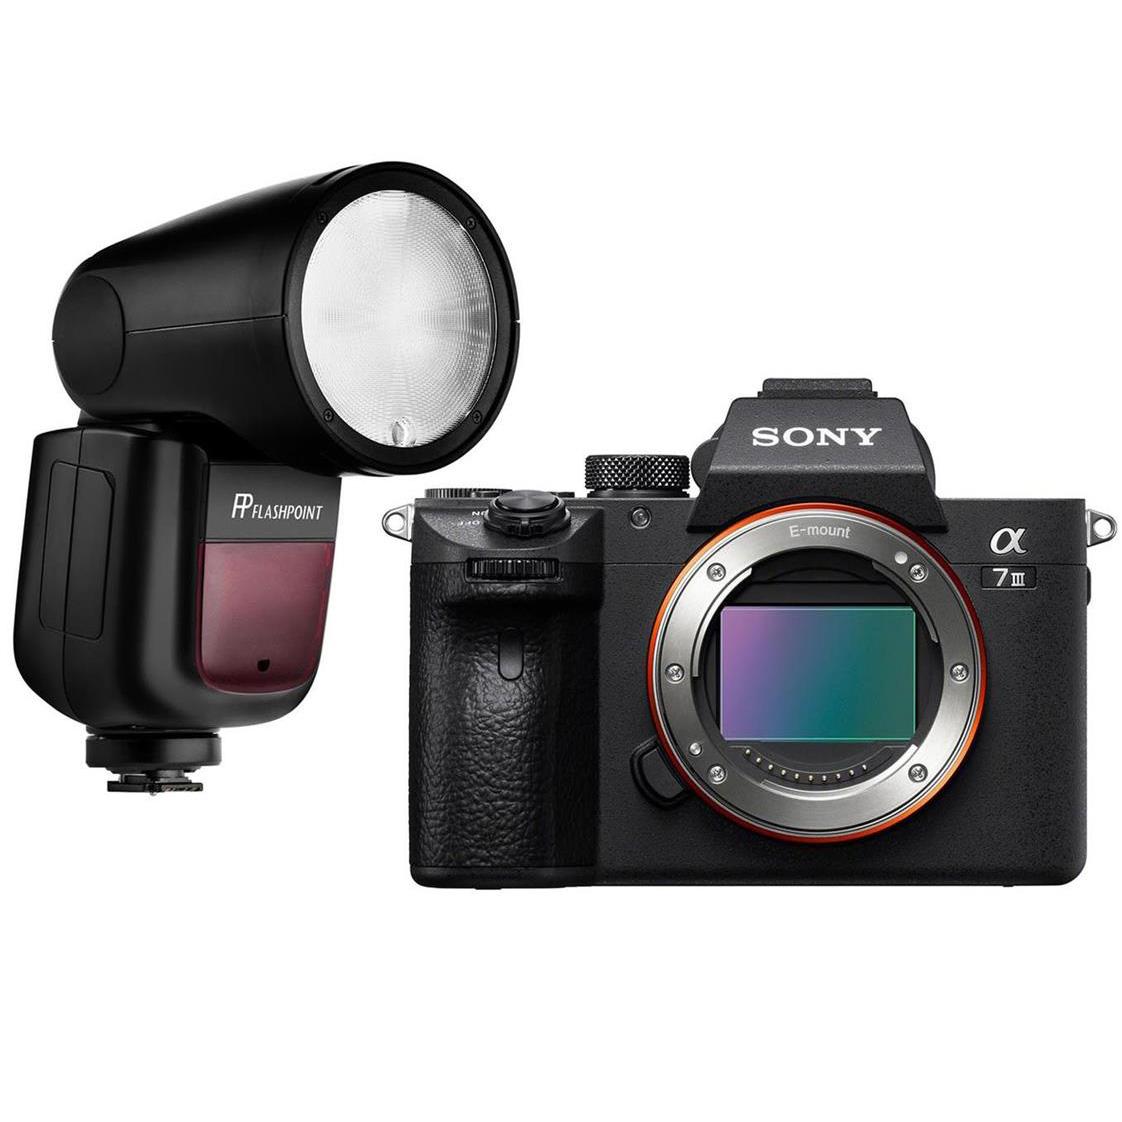 Sony a7 III Mirrorless Digital Camera with Flashpoint Speedlight for $1698 Shipped